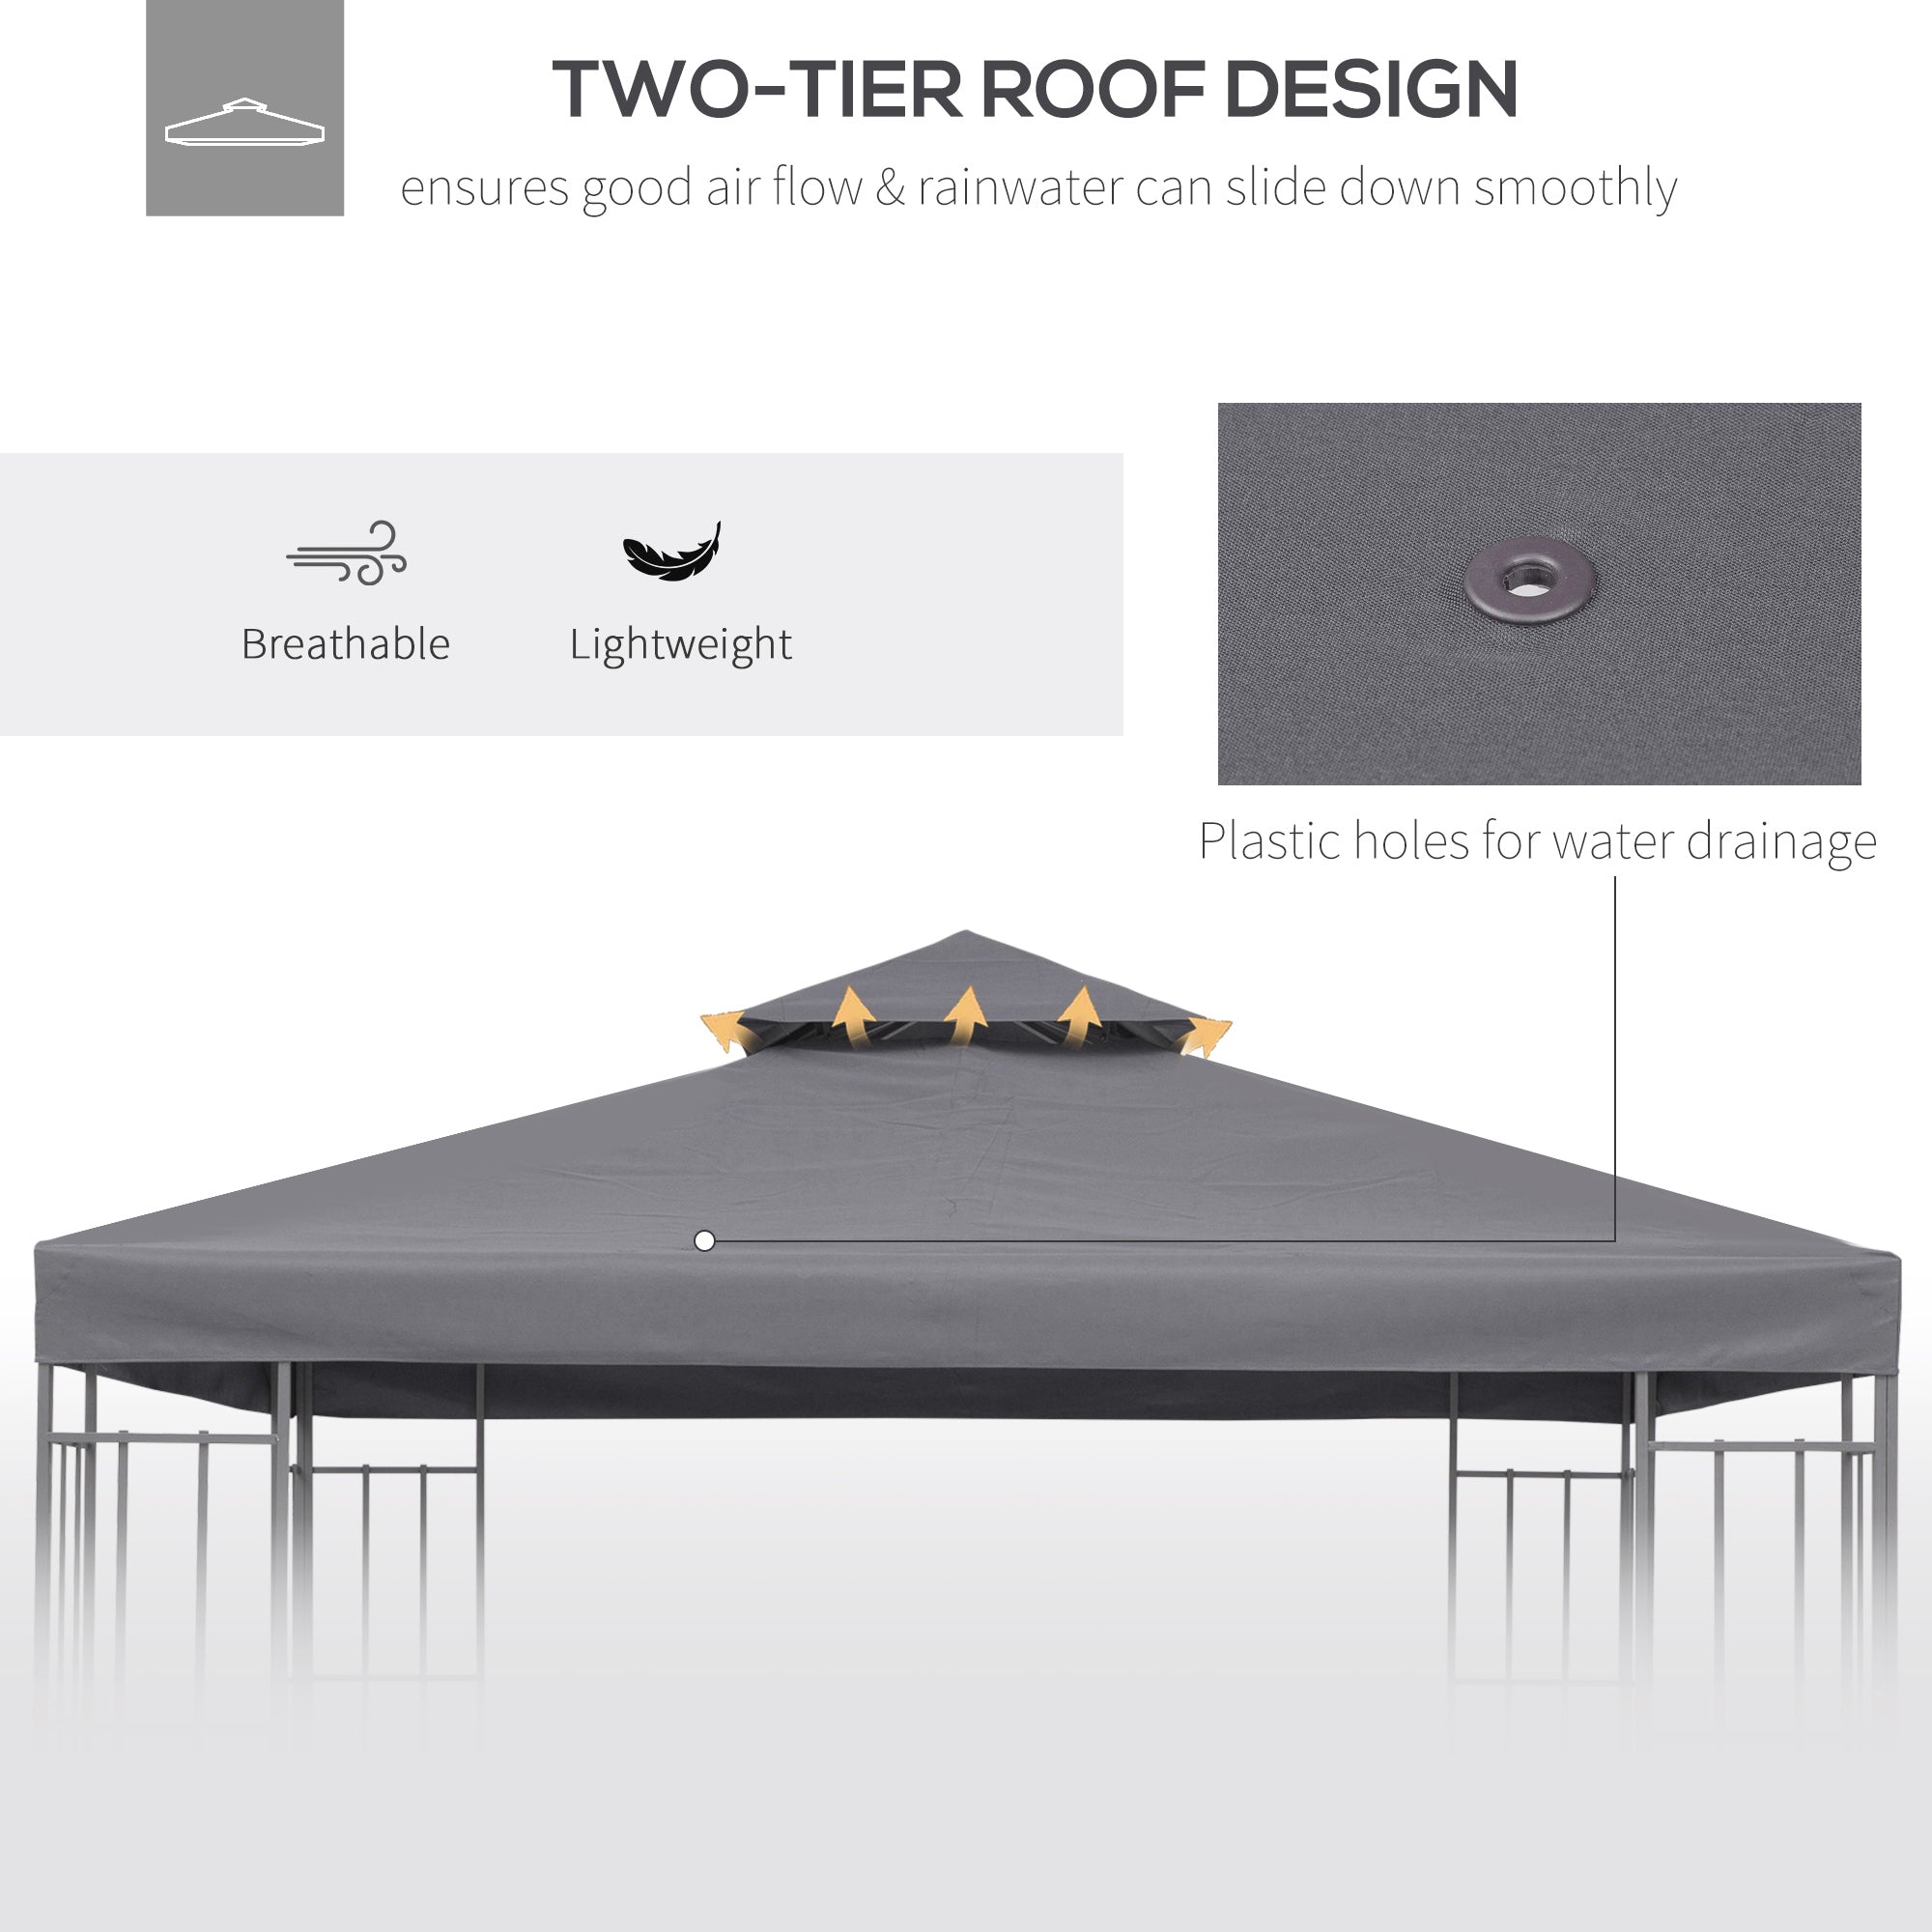 Outsunny 3 x 3(m) Gazebo Canopy Roof Top Replacement Cover Spare Part Deep Grey (TOP ONLY) - Inspirely